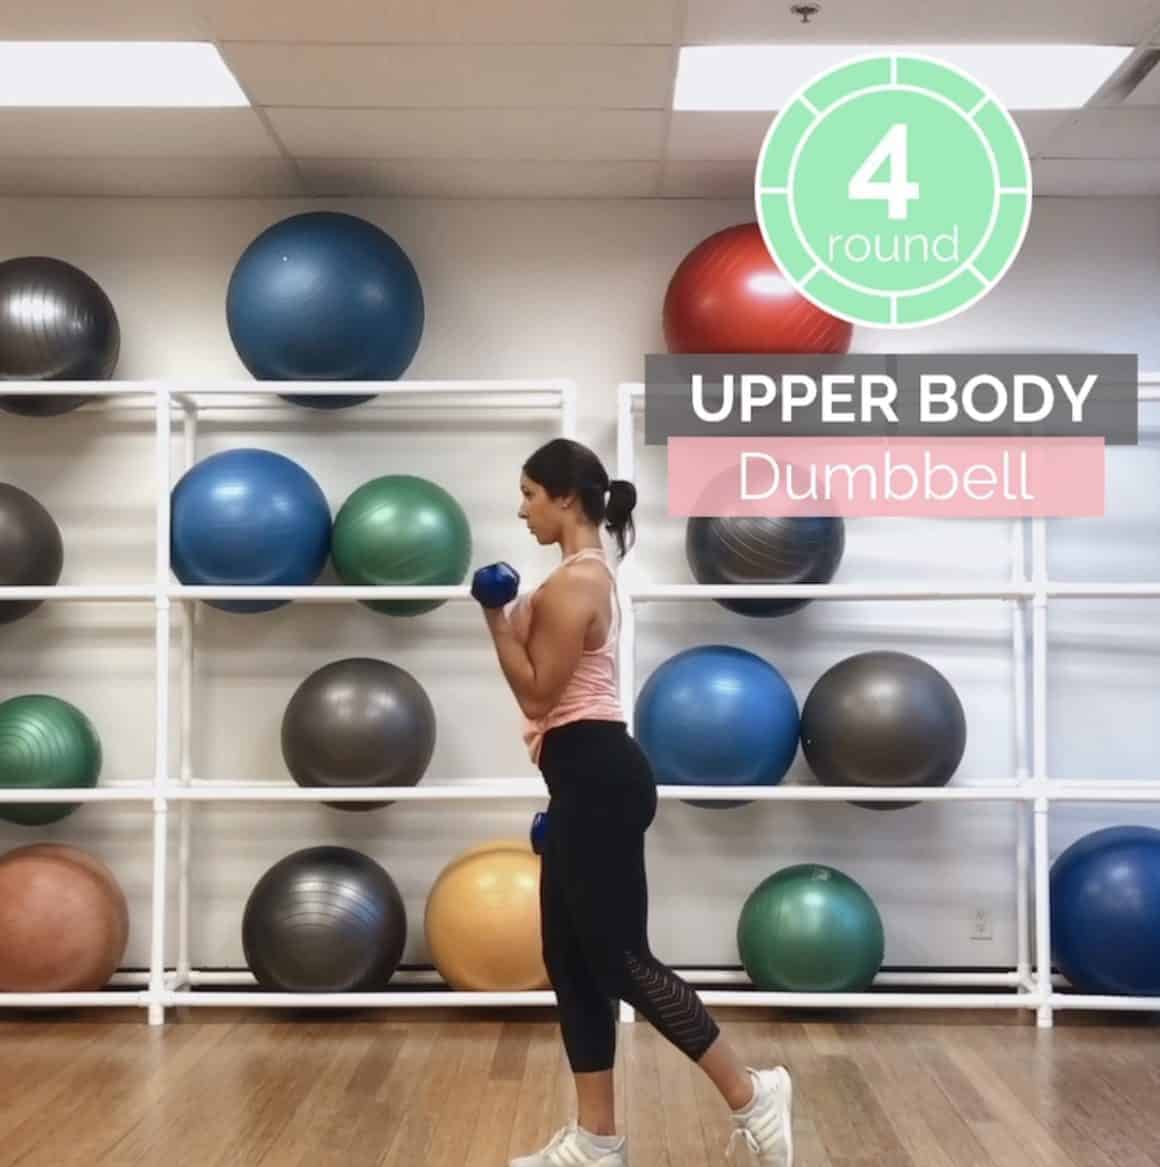 5 Dumbbell Exercises For Upper Body To Improve Posture